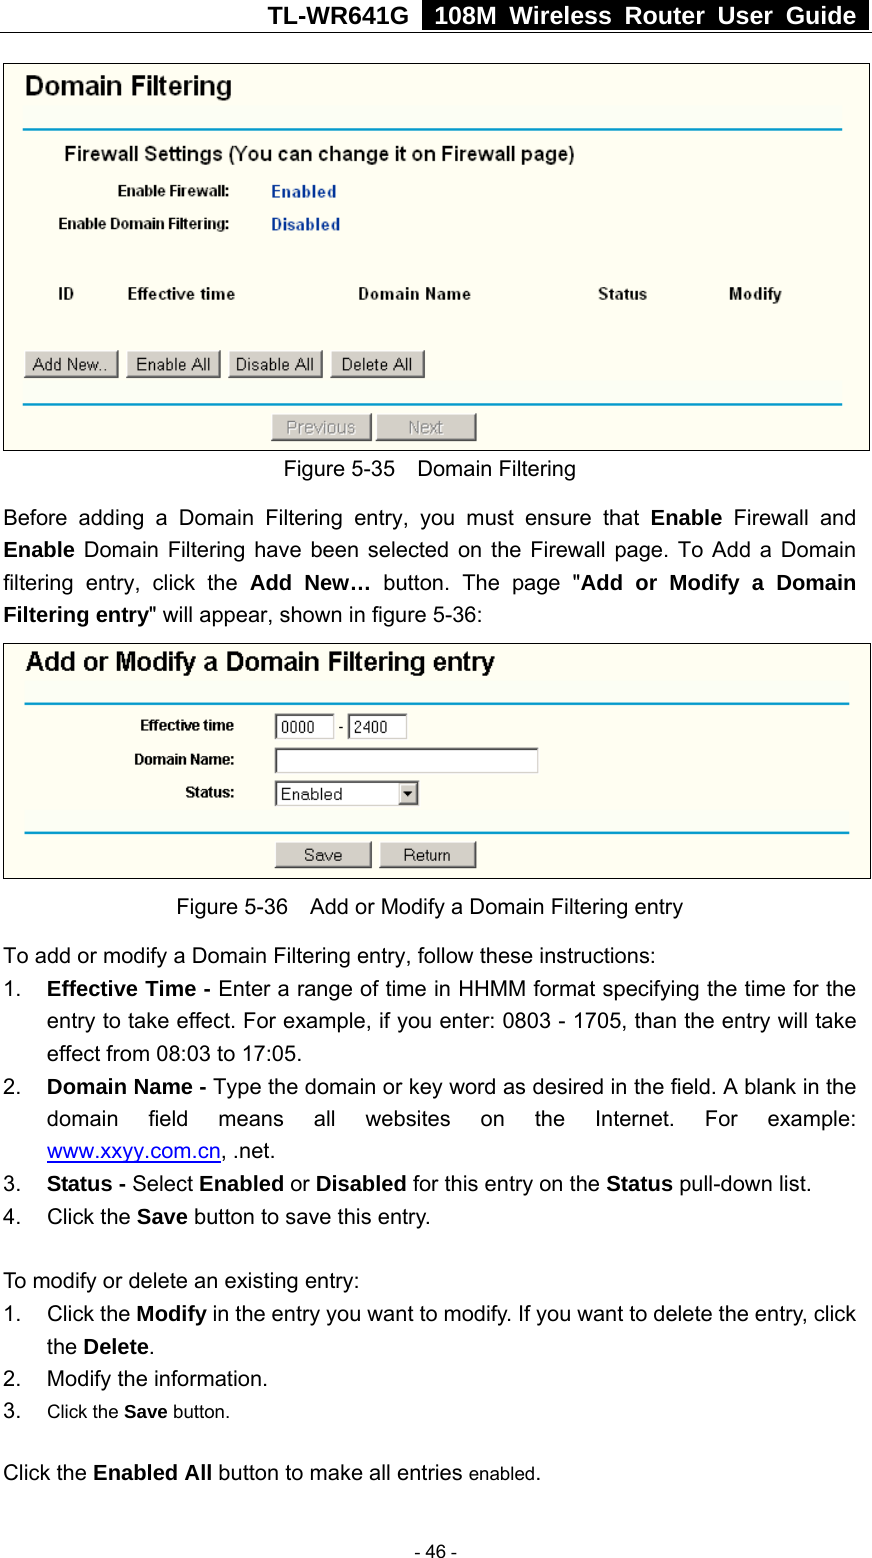 TL-WR641G   108M Wireless Router User Guide   Figure 5-35  Domain Filtering Before adding a Domain Filtering entry, you must ensure that Enable Firewall and Enable Domain Filtering have been selected on the Firewall page. To Add a Domain filtering entry, click the Add New… button. The page &quot;Add or Modify a Domain Filtering entry&quot; will appear, shown in figure 5-36:  Figure 5-36    Add or Modify a Domain Filtering entry To add or modify a Domain Filtering entry, follow these instructions: 1.  Effective Time - Enter a range of time in HHMM format specifying the time for the entry to take effect. For example, if you enter: 0803 - 1705, than the entry will take effect from 08:03 to 17:05. 2.  Domain Name - Type the domain or key word as desired in the field. A blank in the domain field means all websites on the Internet. For example: www.xxyy.com.cn, .net. 3.  Status - Select Enabled or Disabled for this entry on the Status pull-down list. 4. Click the Save button to save this entry.  To modify or delete an existing entry: 1. Click the Modify in the entry you want to modify. If you want to delete the entry, click the Delete. 2.  Modify the information.   3.  Click the Save button. Click the Enabled All button to make all entries enabled.  - 46 - 